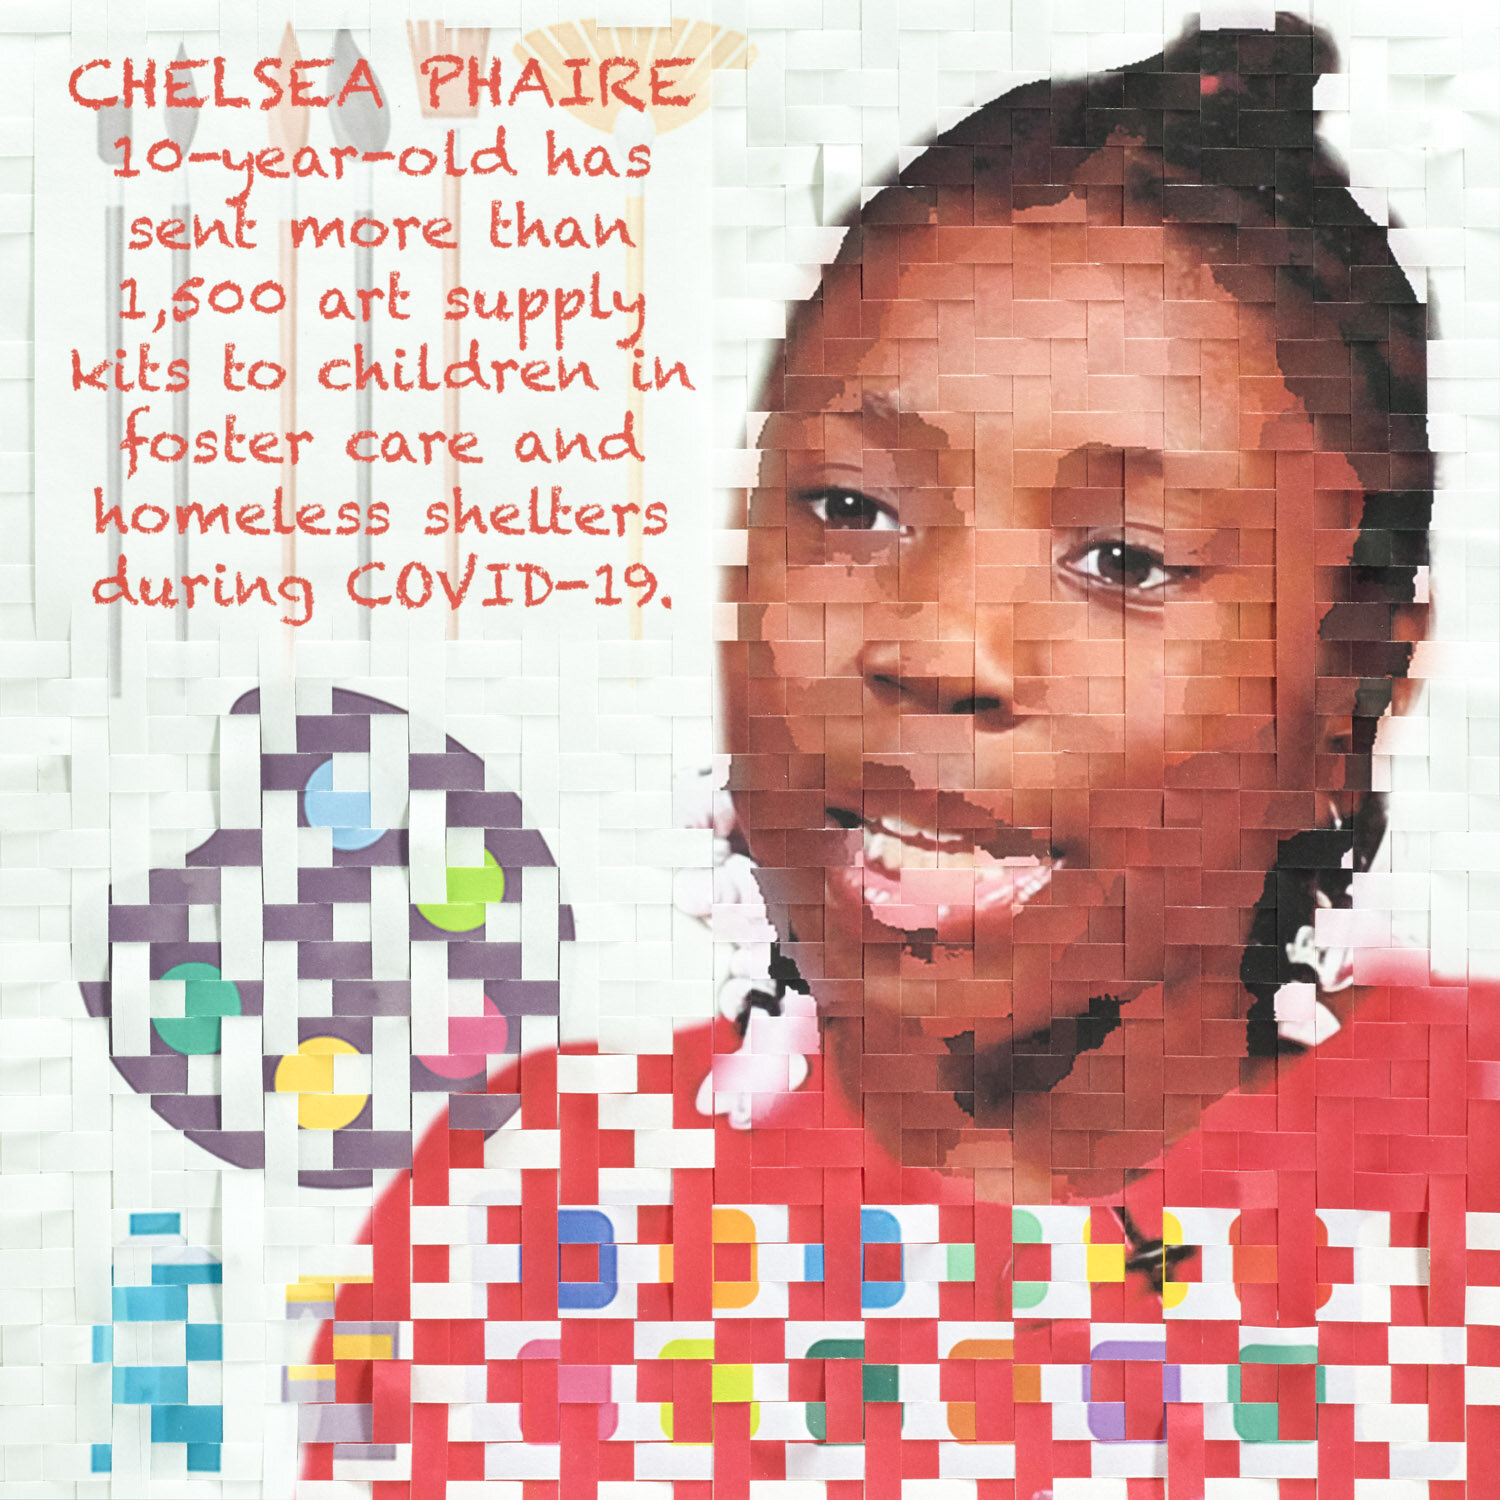 Day 46: Chelsea Phaire